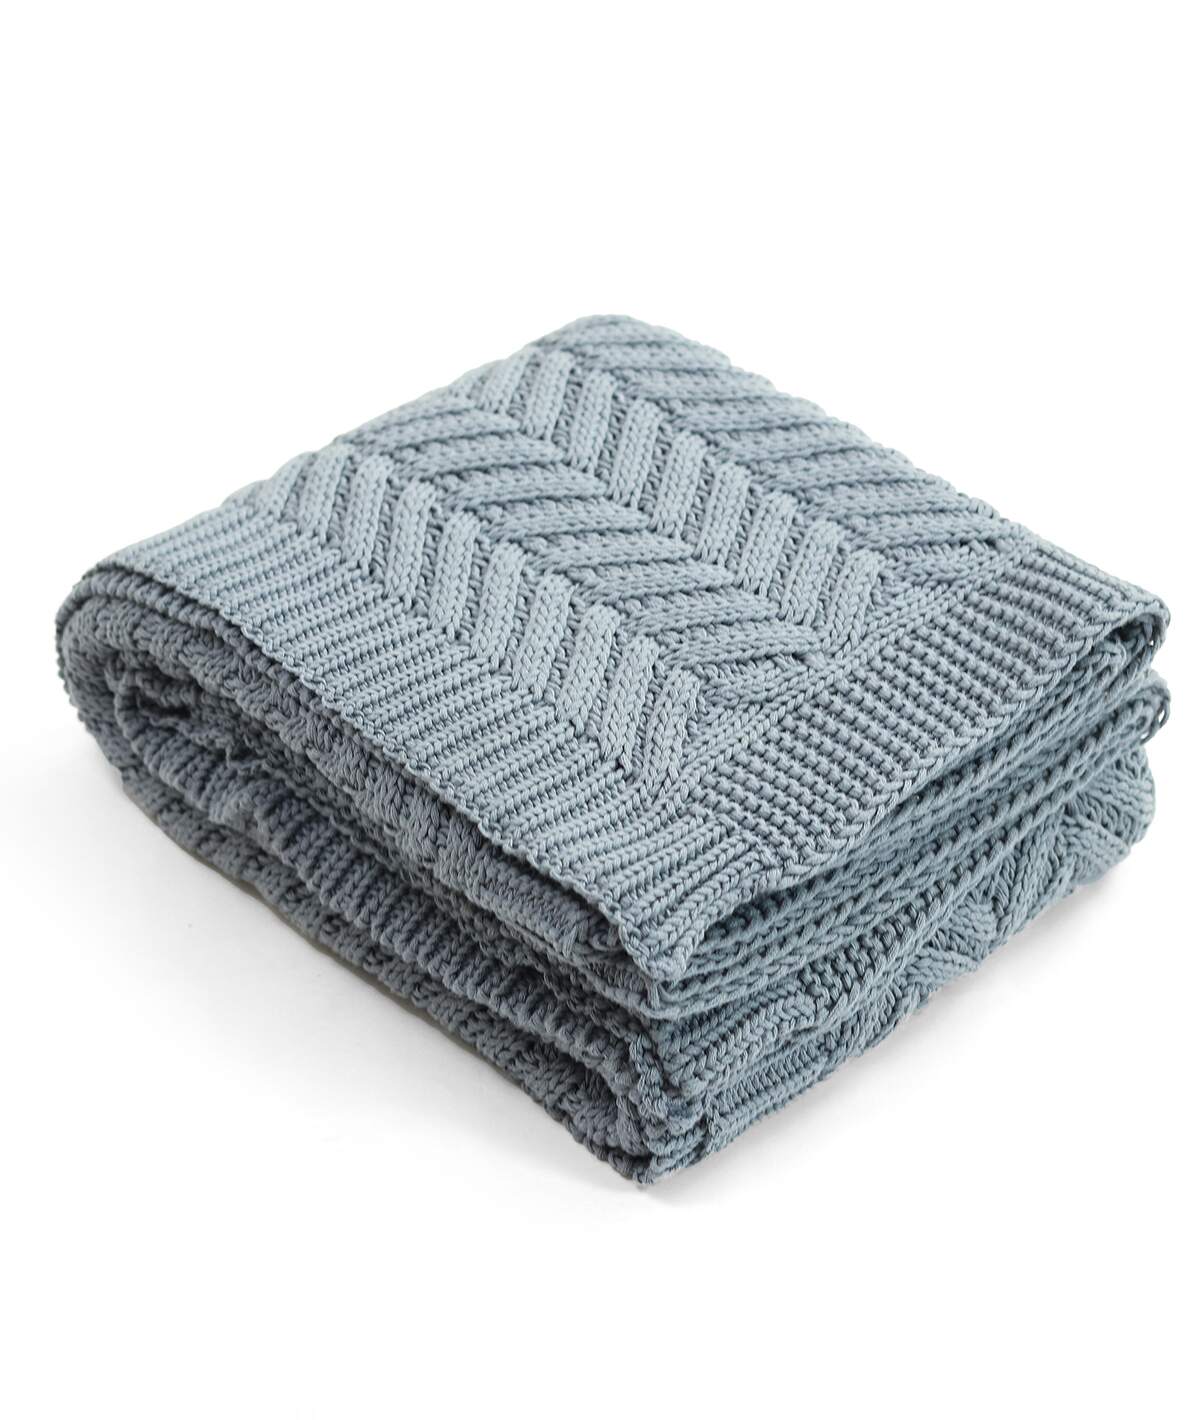 Chevron Blue Grey Color Cotton Knitted Throw /Blanket  For Round The Year Use